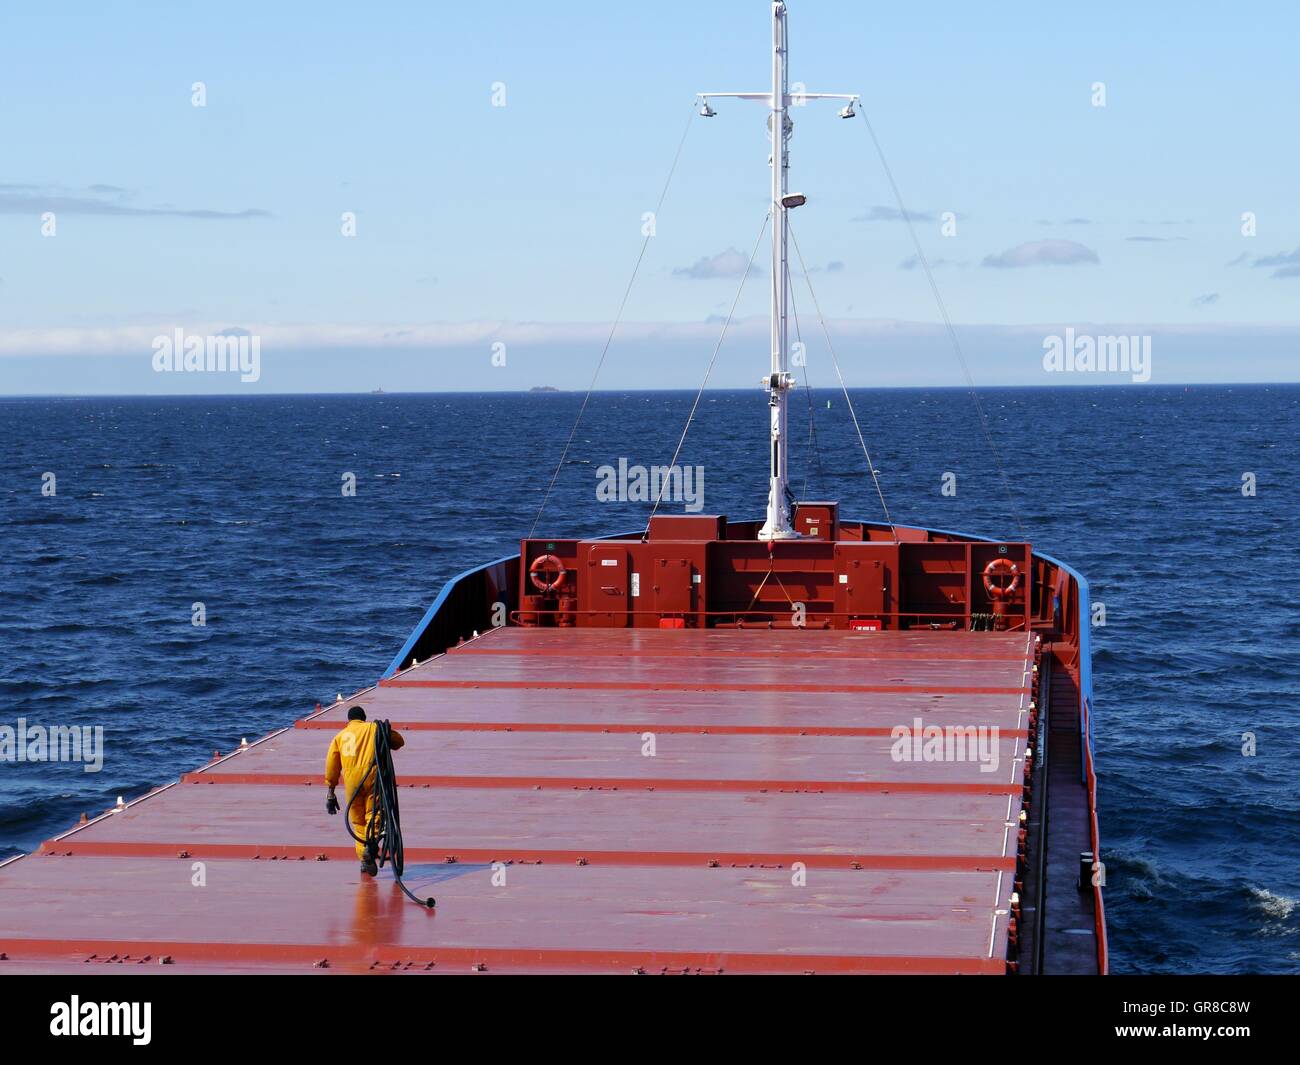 Freighter In Calm Sea Stock Photo